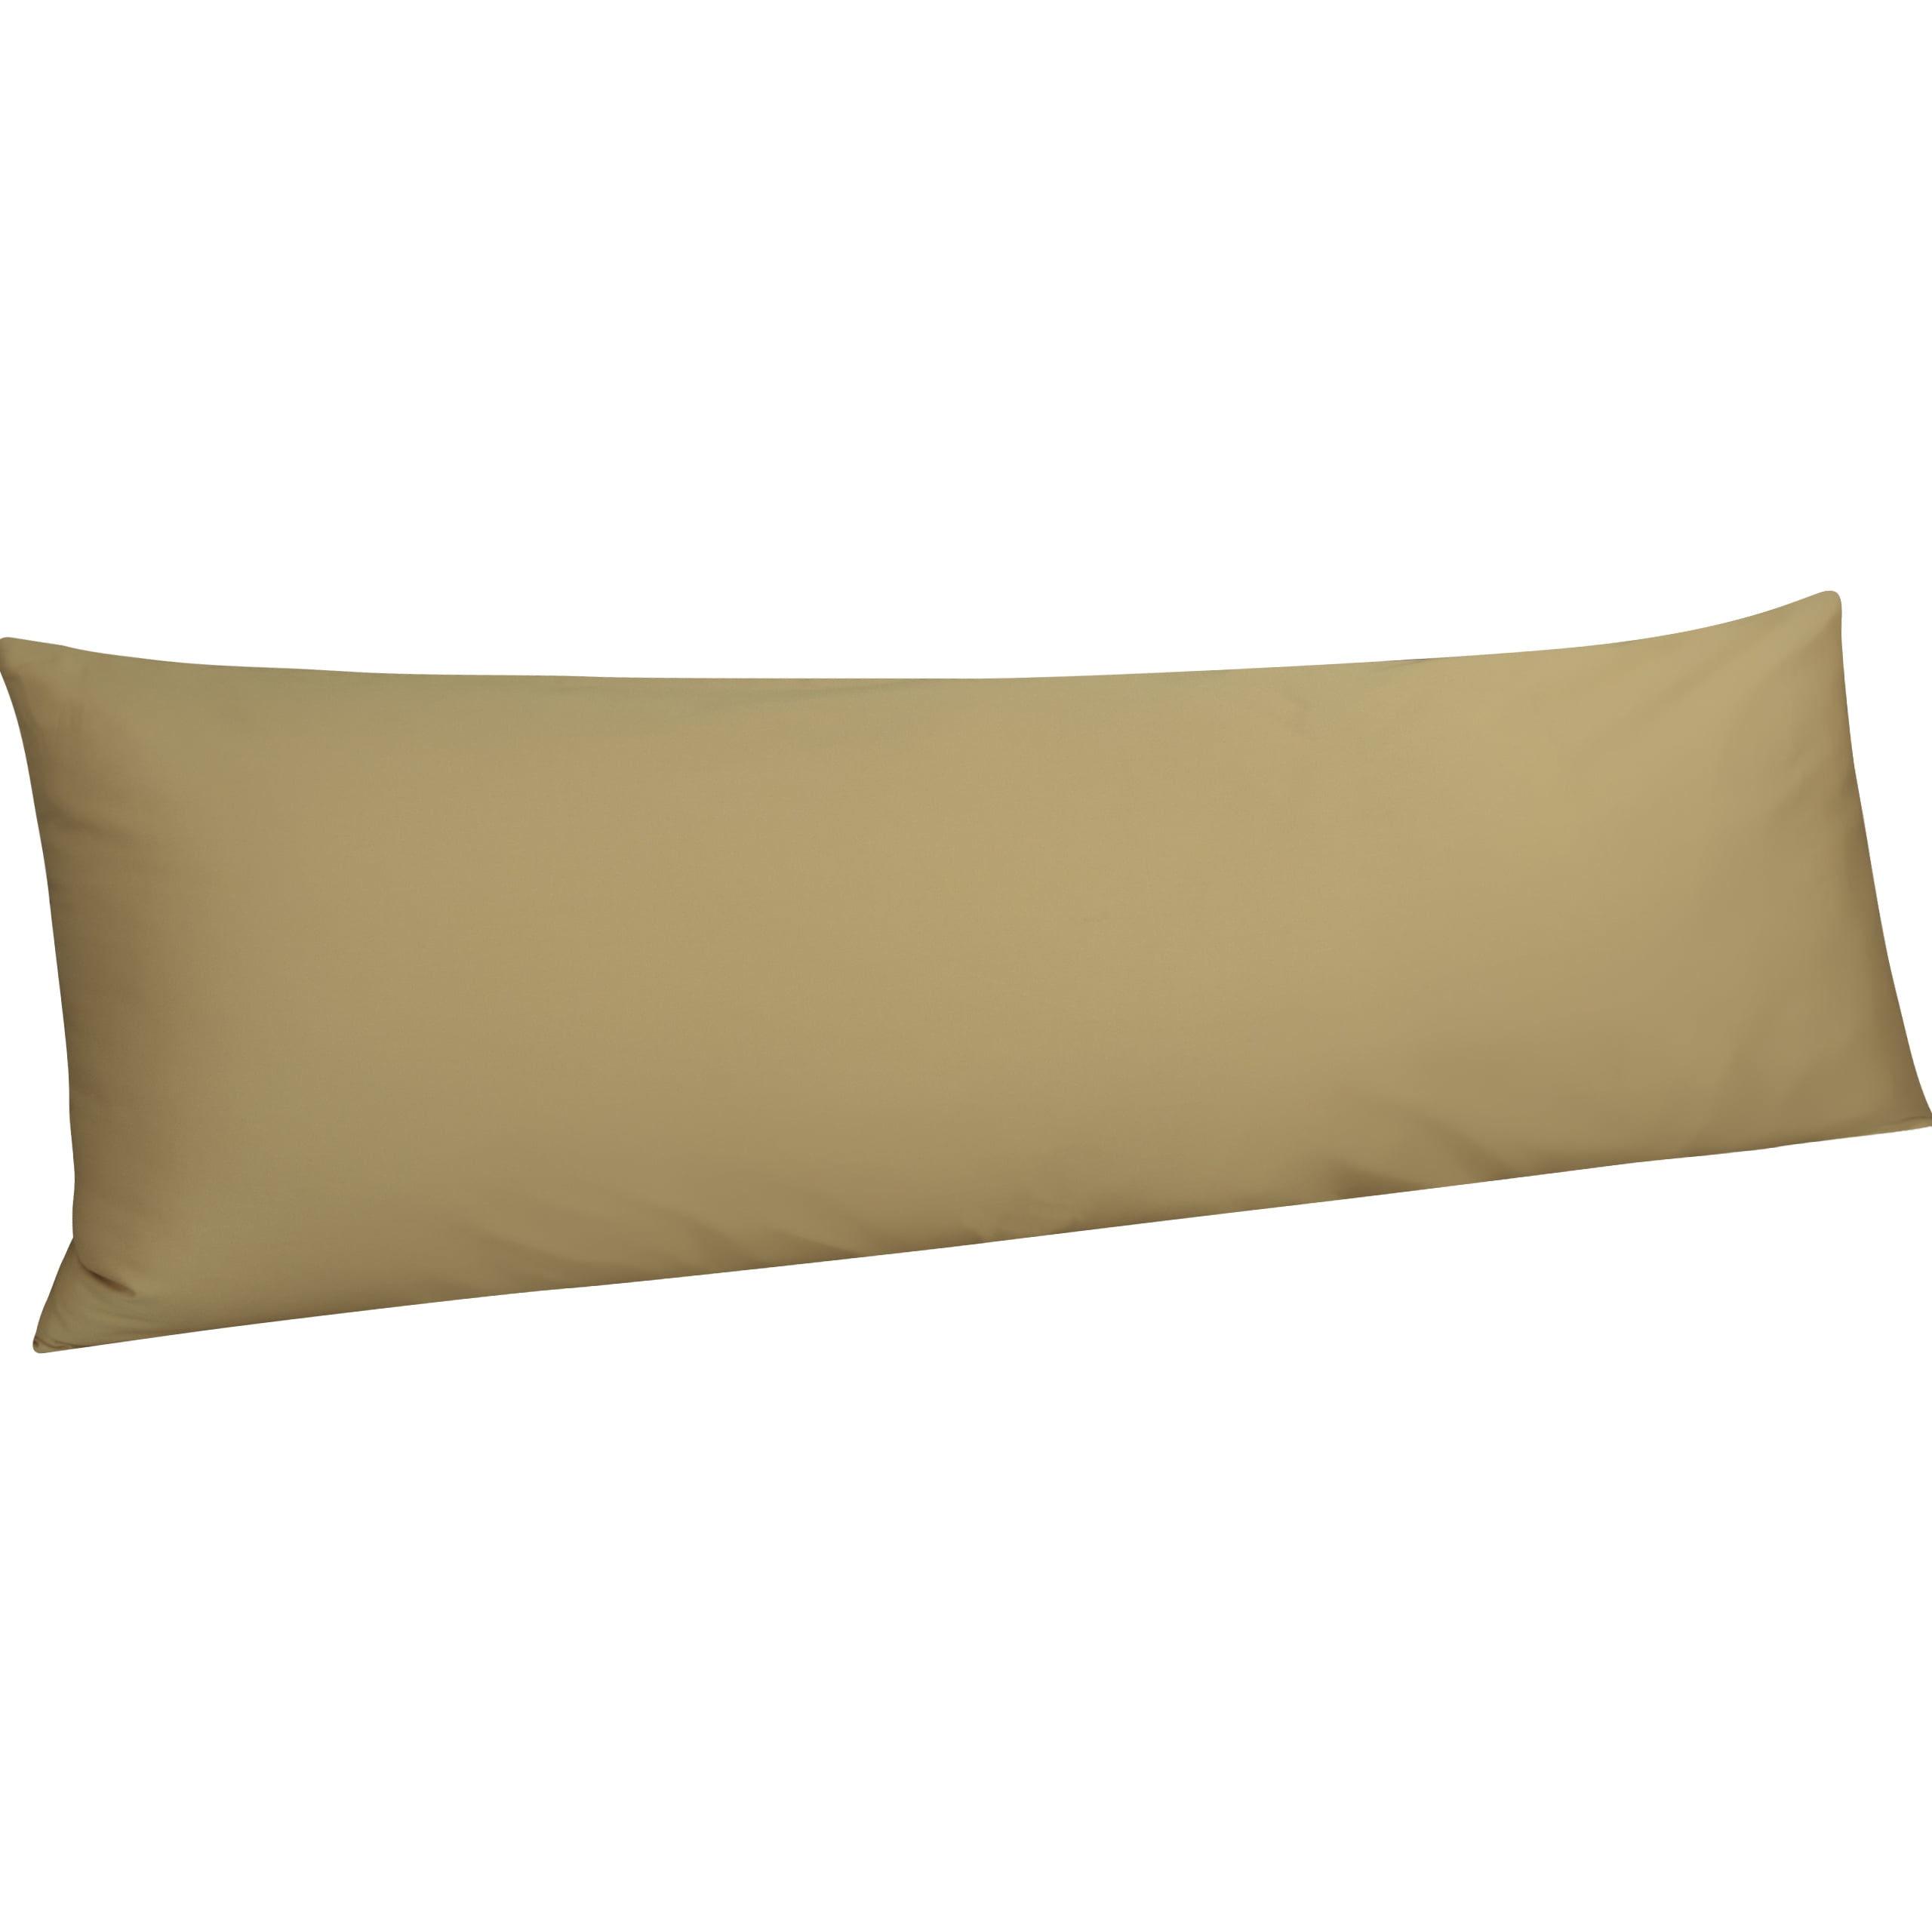 Details about   Satin Body Pillow Cover 1800 Thread Count Soft Body Pillowcase with Zipper 20x54 